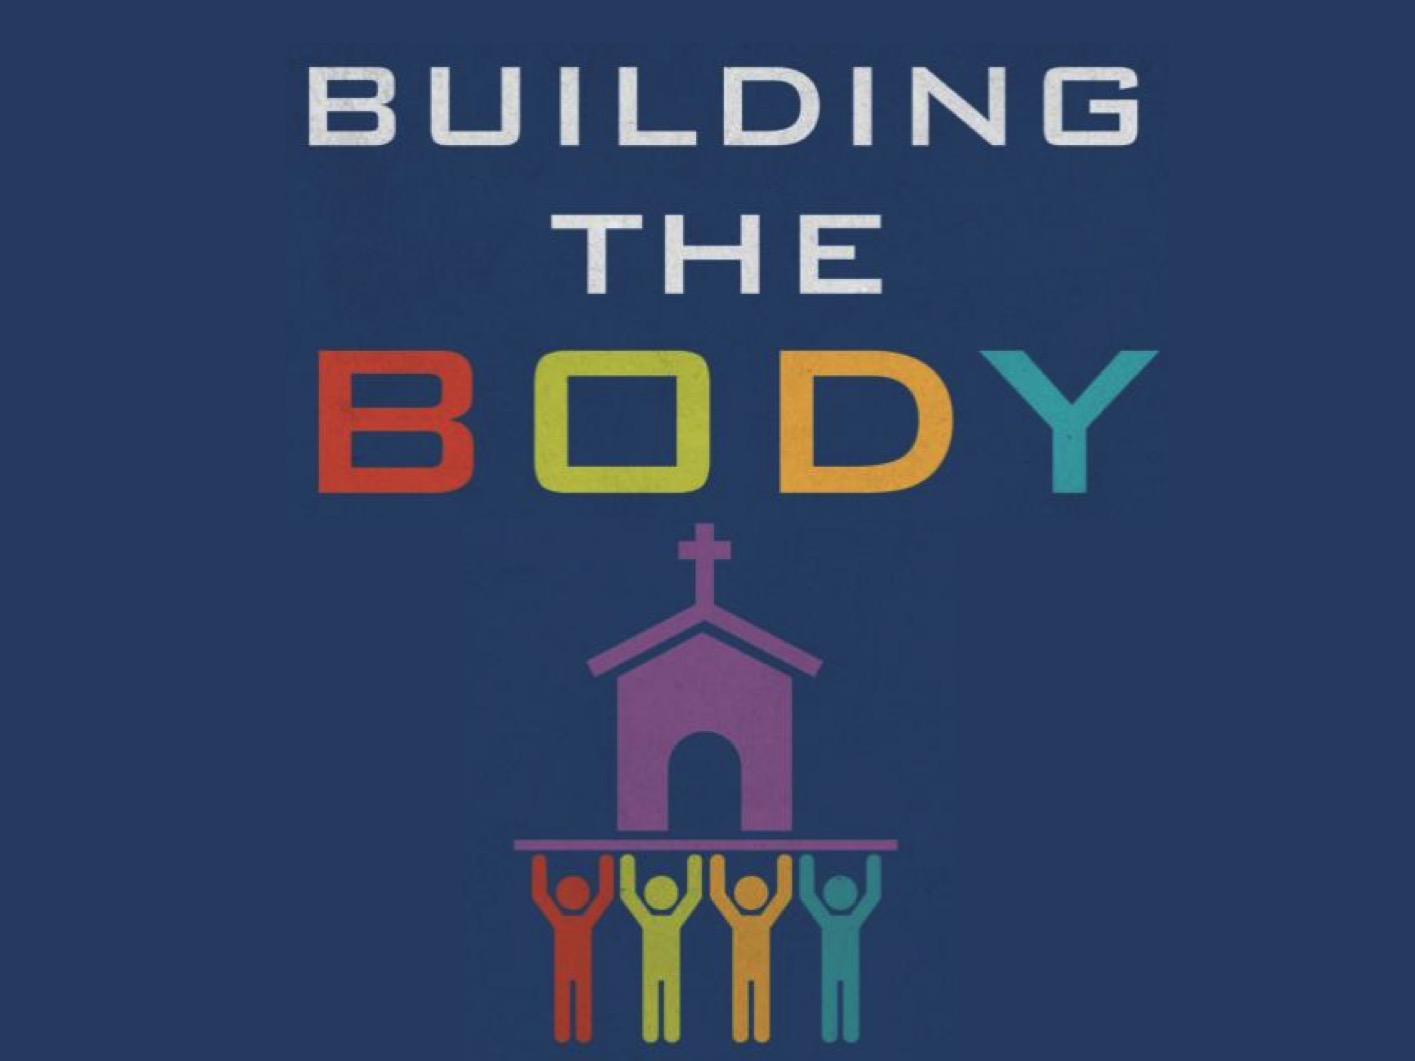 Building The Body: Sunday August 12, 2018